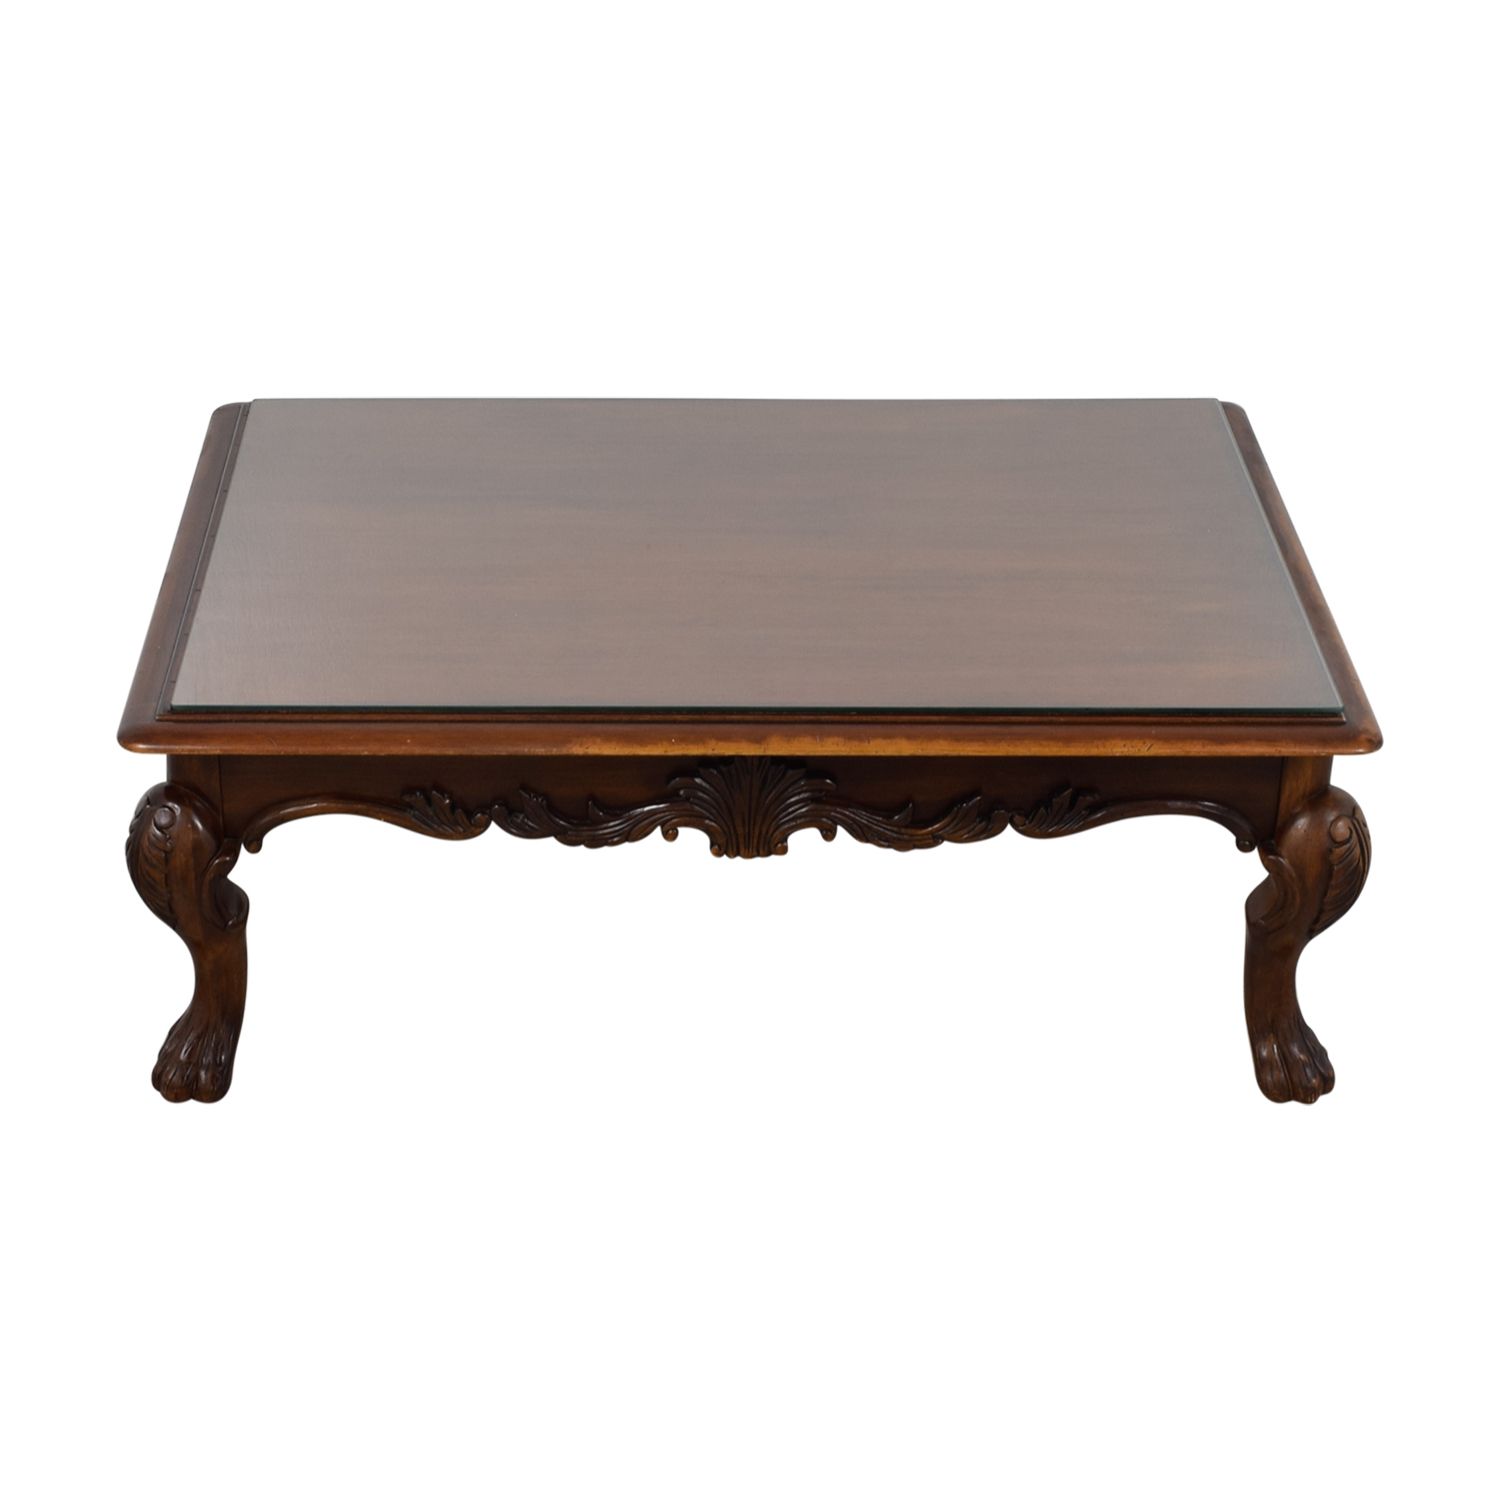 [%75% Off – Rectangular Carved Wood Coffee Table With Glass Throughout 2018 Rectangular Glass Top Coffee Tables|rectangular Glass Top Coffee Tables Throughout Well Known 75% Off – Rectangular Carved Wood Coffee Table With Glass|most Current Rectangular Glass Top Coffee Tables Regarding 75% Off – Rectangular Carved Wood Coffee Table With Glass|best And Newest 75% Off – Rectangular Carved Wood Coffee Table With Glass In Rectangular Glass Top Coffee Tables%] (View 4 of 20)